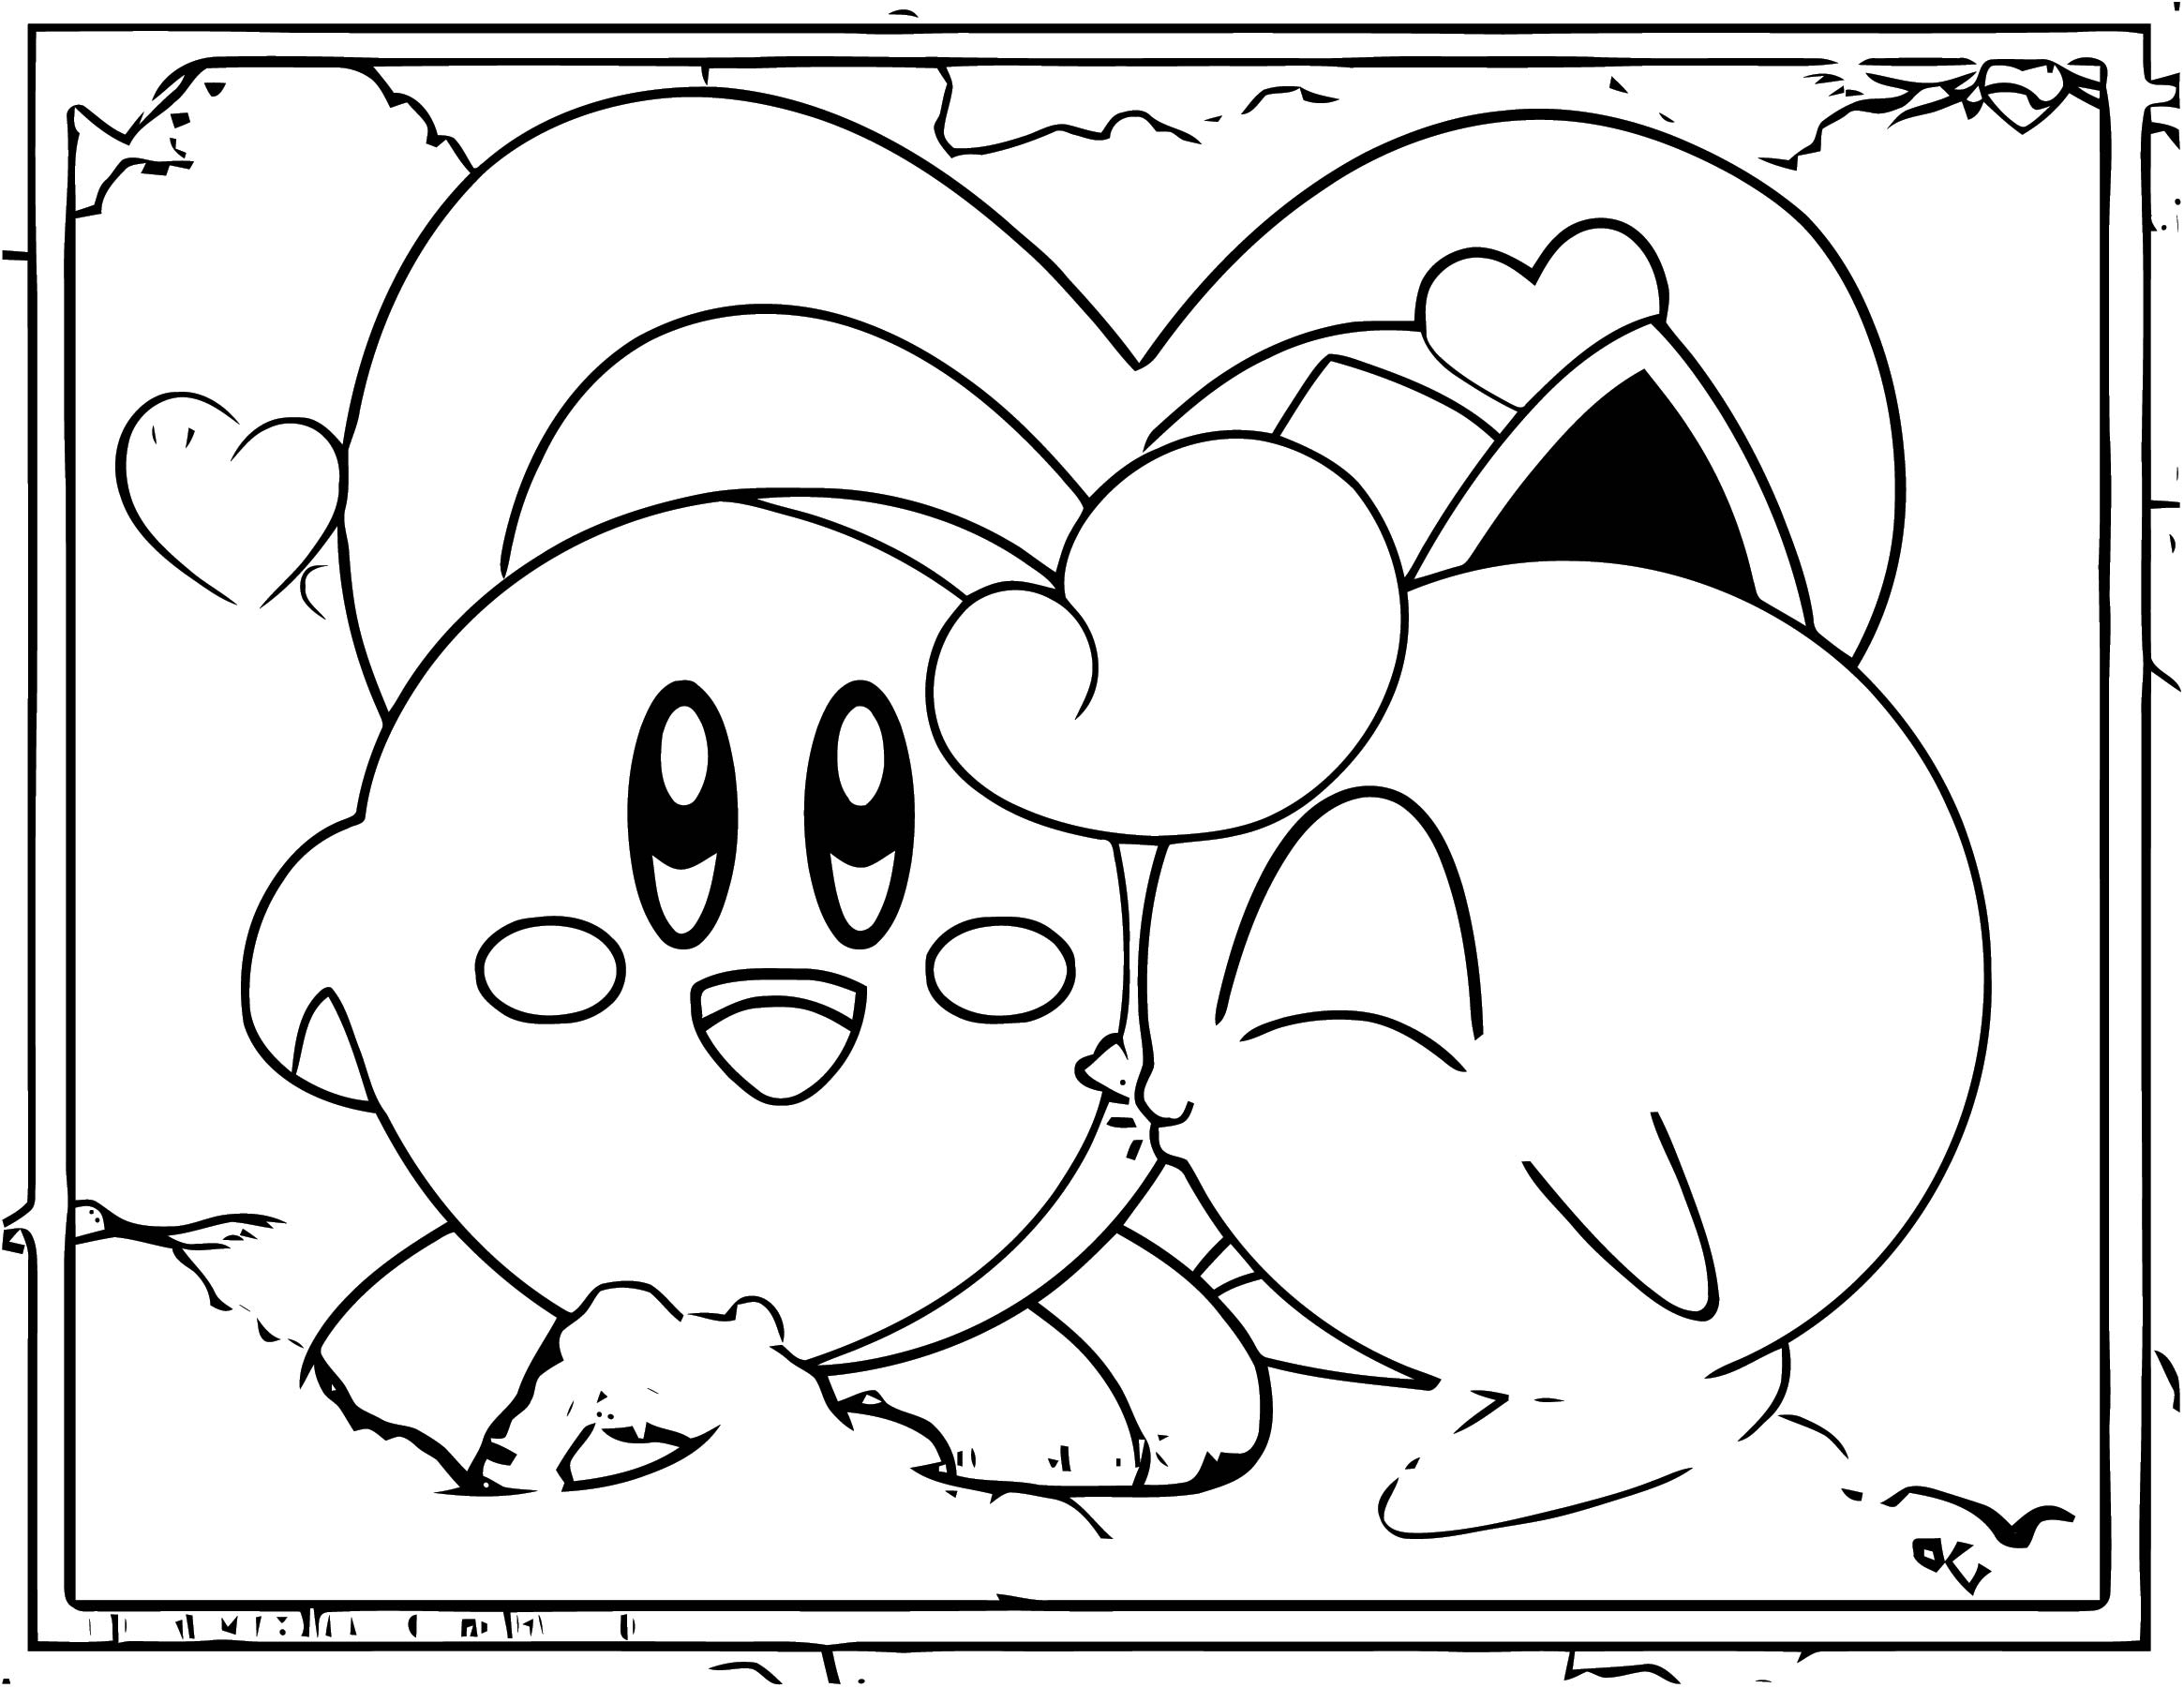 Jigglypuff Kisses Kirby Coloring Page - Wecoloringpage.com